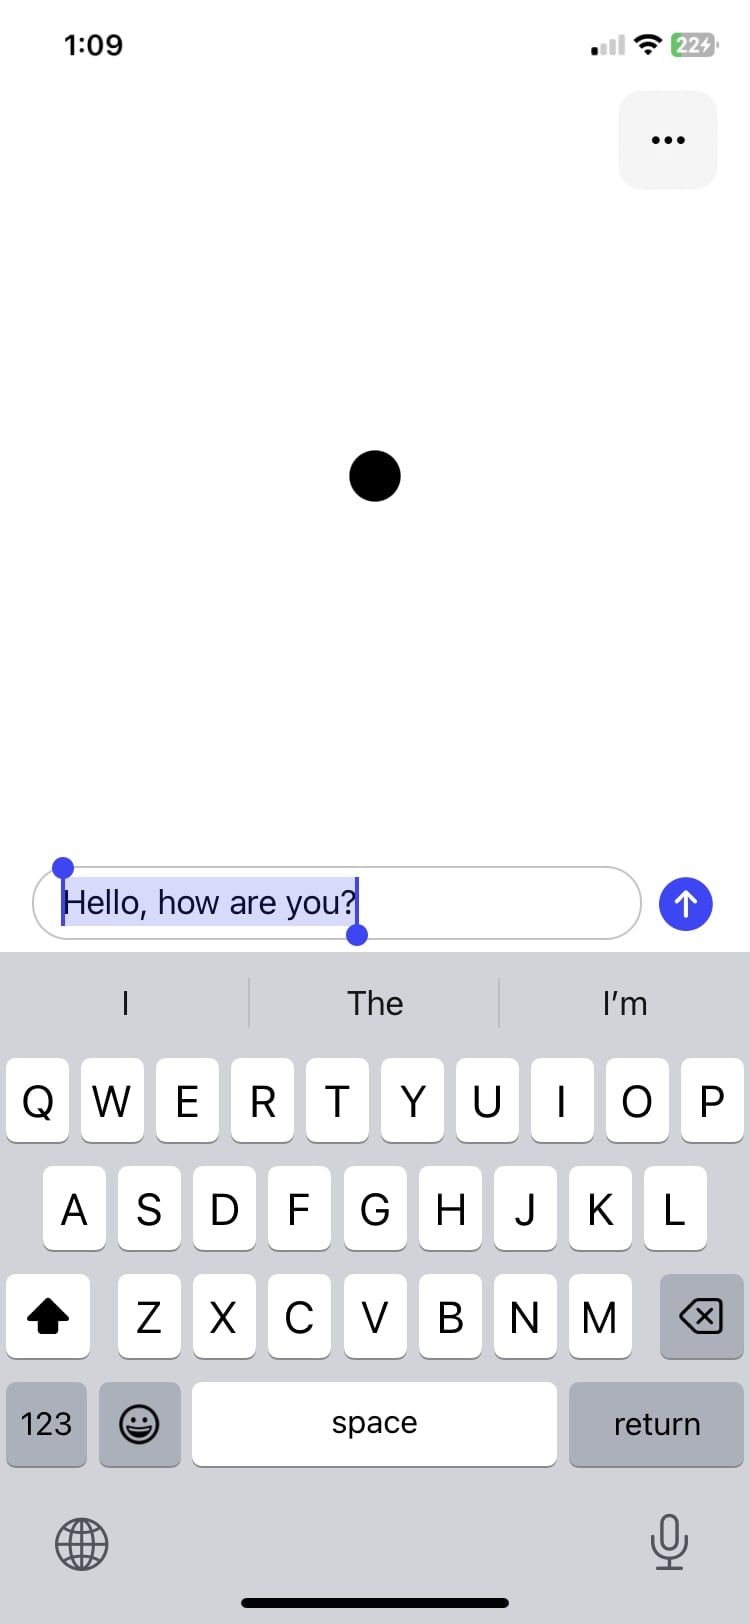 voice to text conversation in chatGPT iOS app